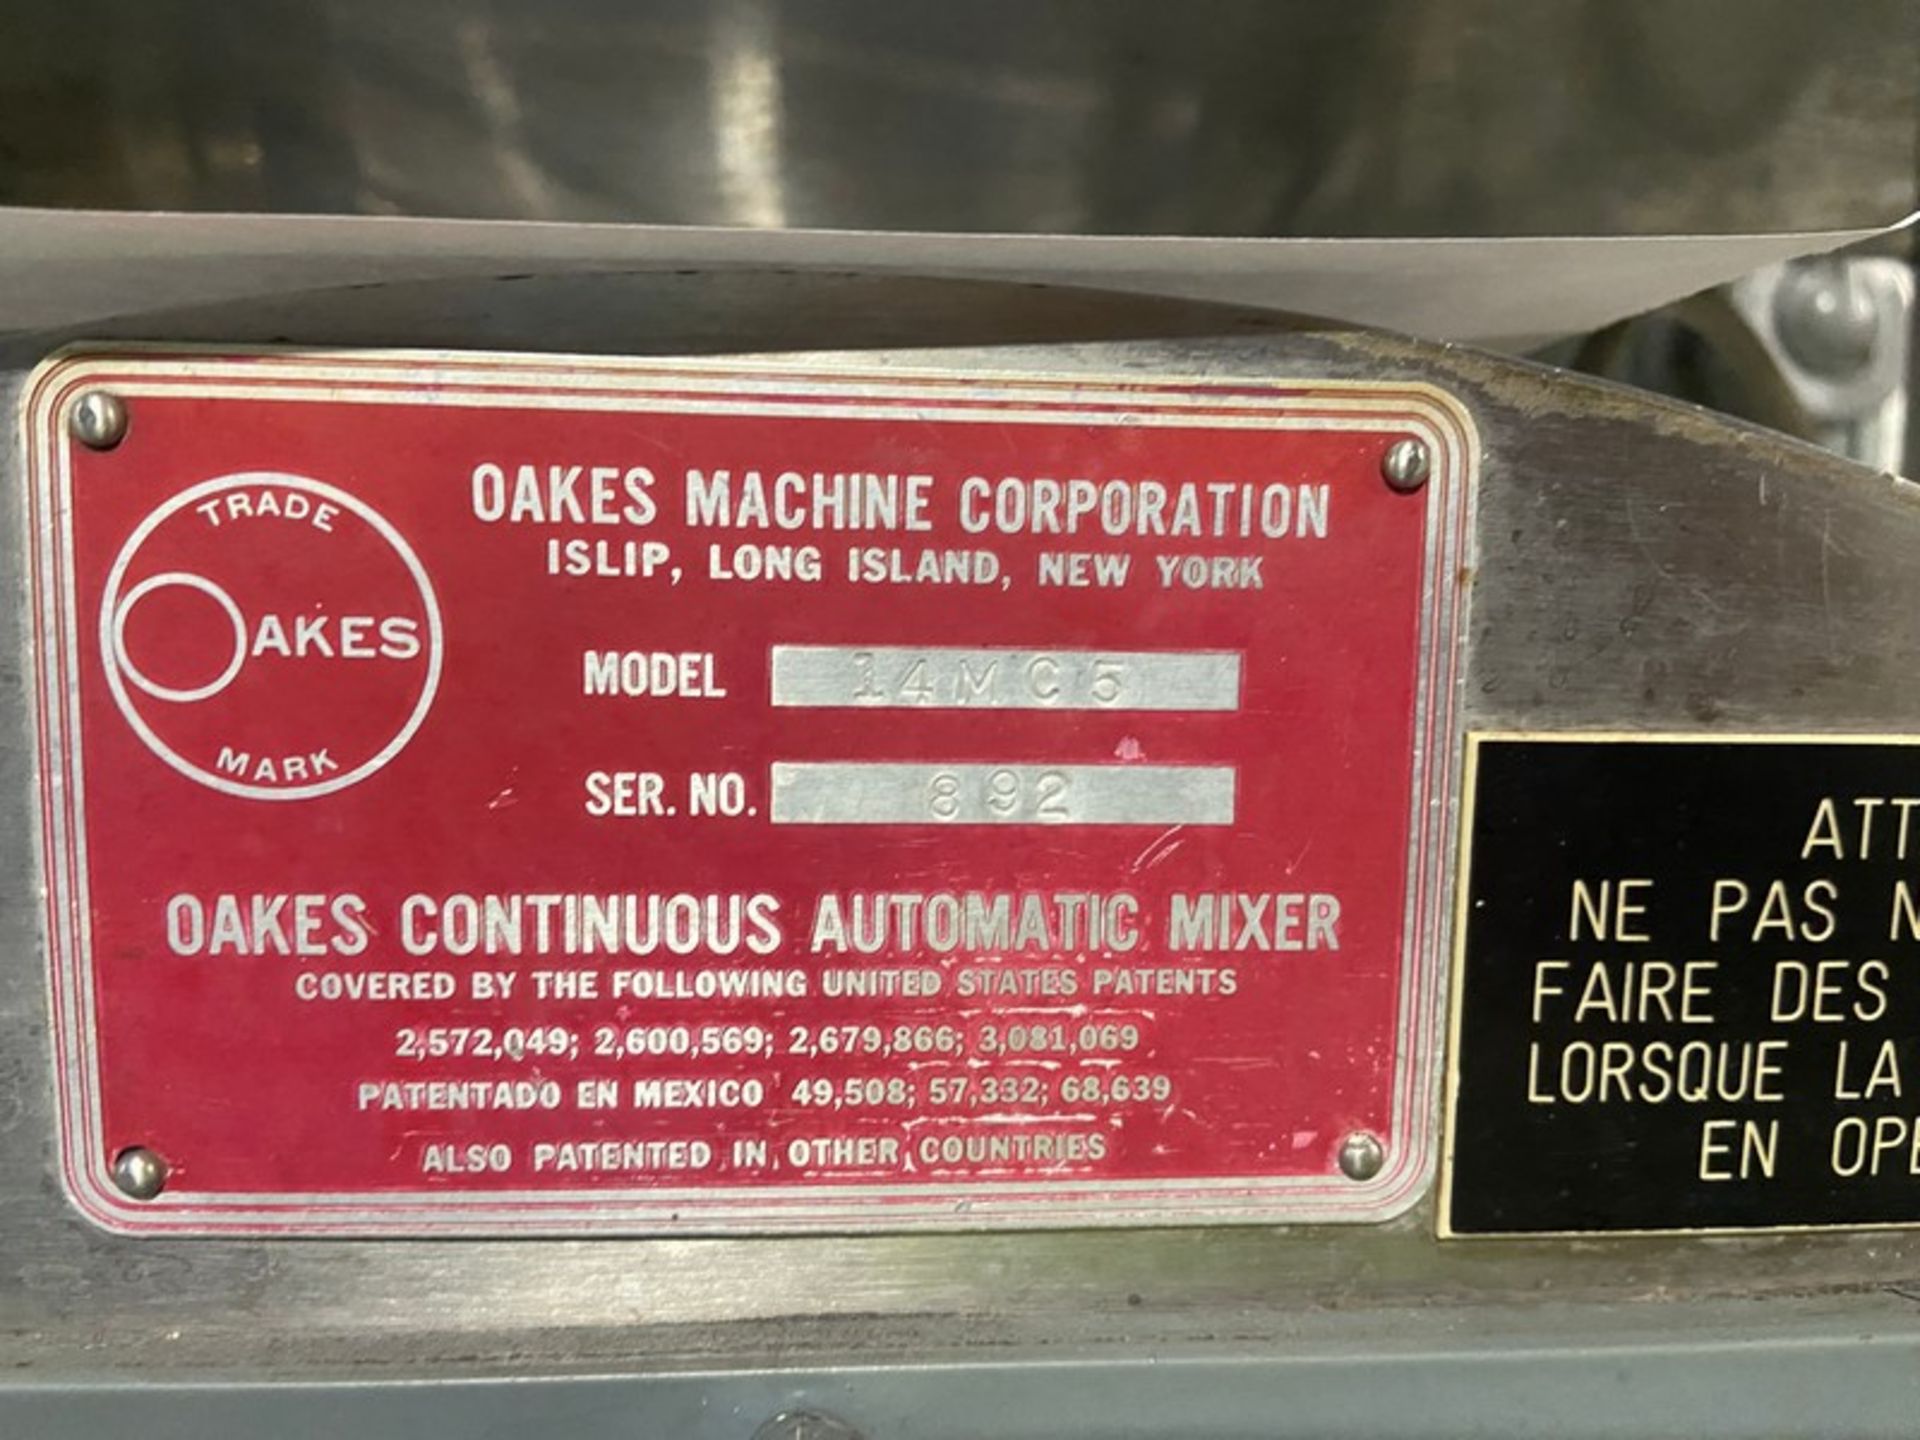 OAKES Machine Corp. Continuous Mixer, mod. 14MC5, ser. 892, with Bottom Mounted Positive - Image 3 of 4